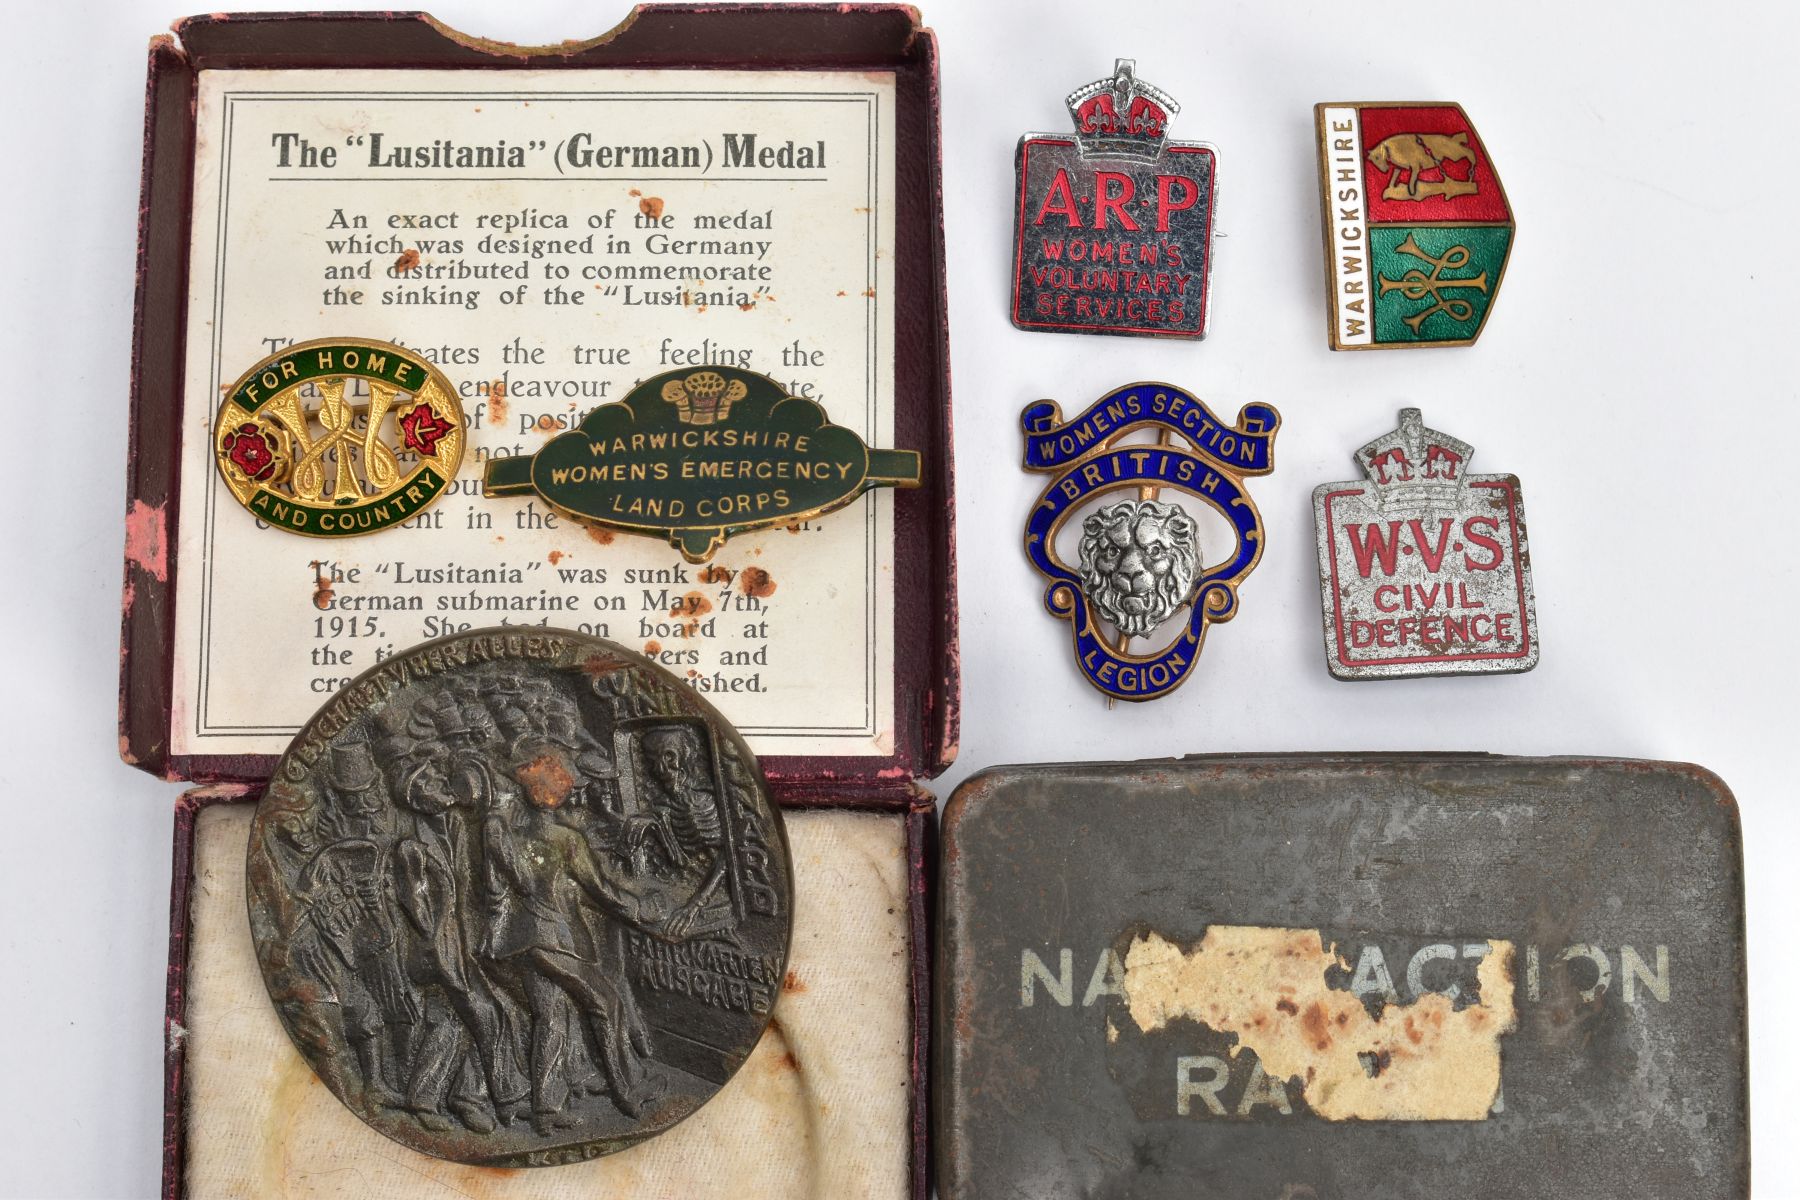 A WORLD WAR ONE ERA BOXED LUSITANIA MEDAL, which includes the medal itself and original box of - Image 3 of 3